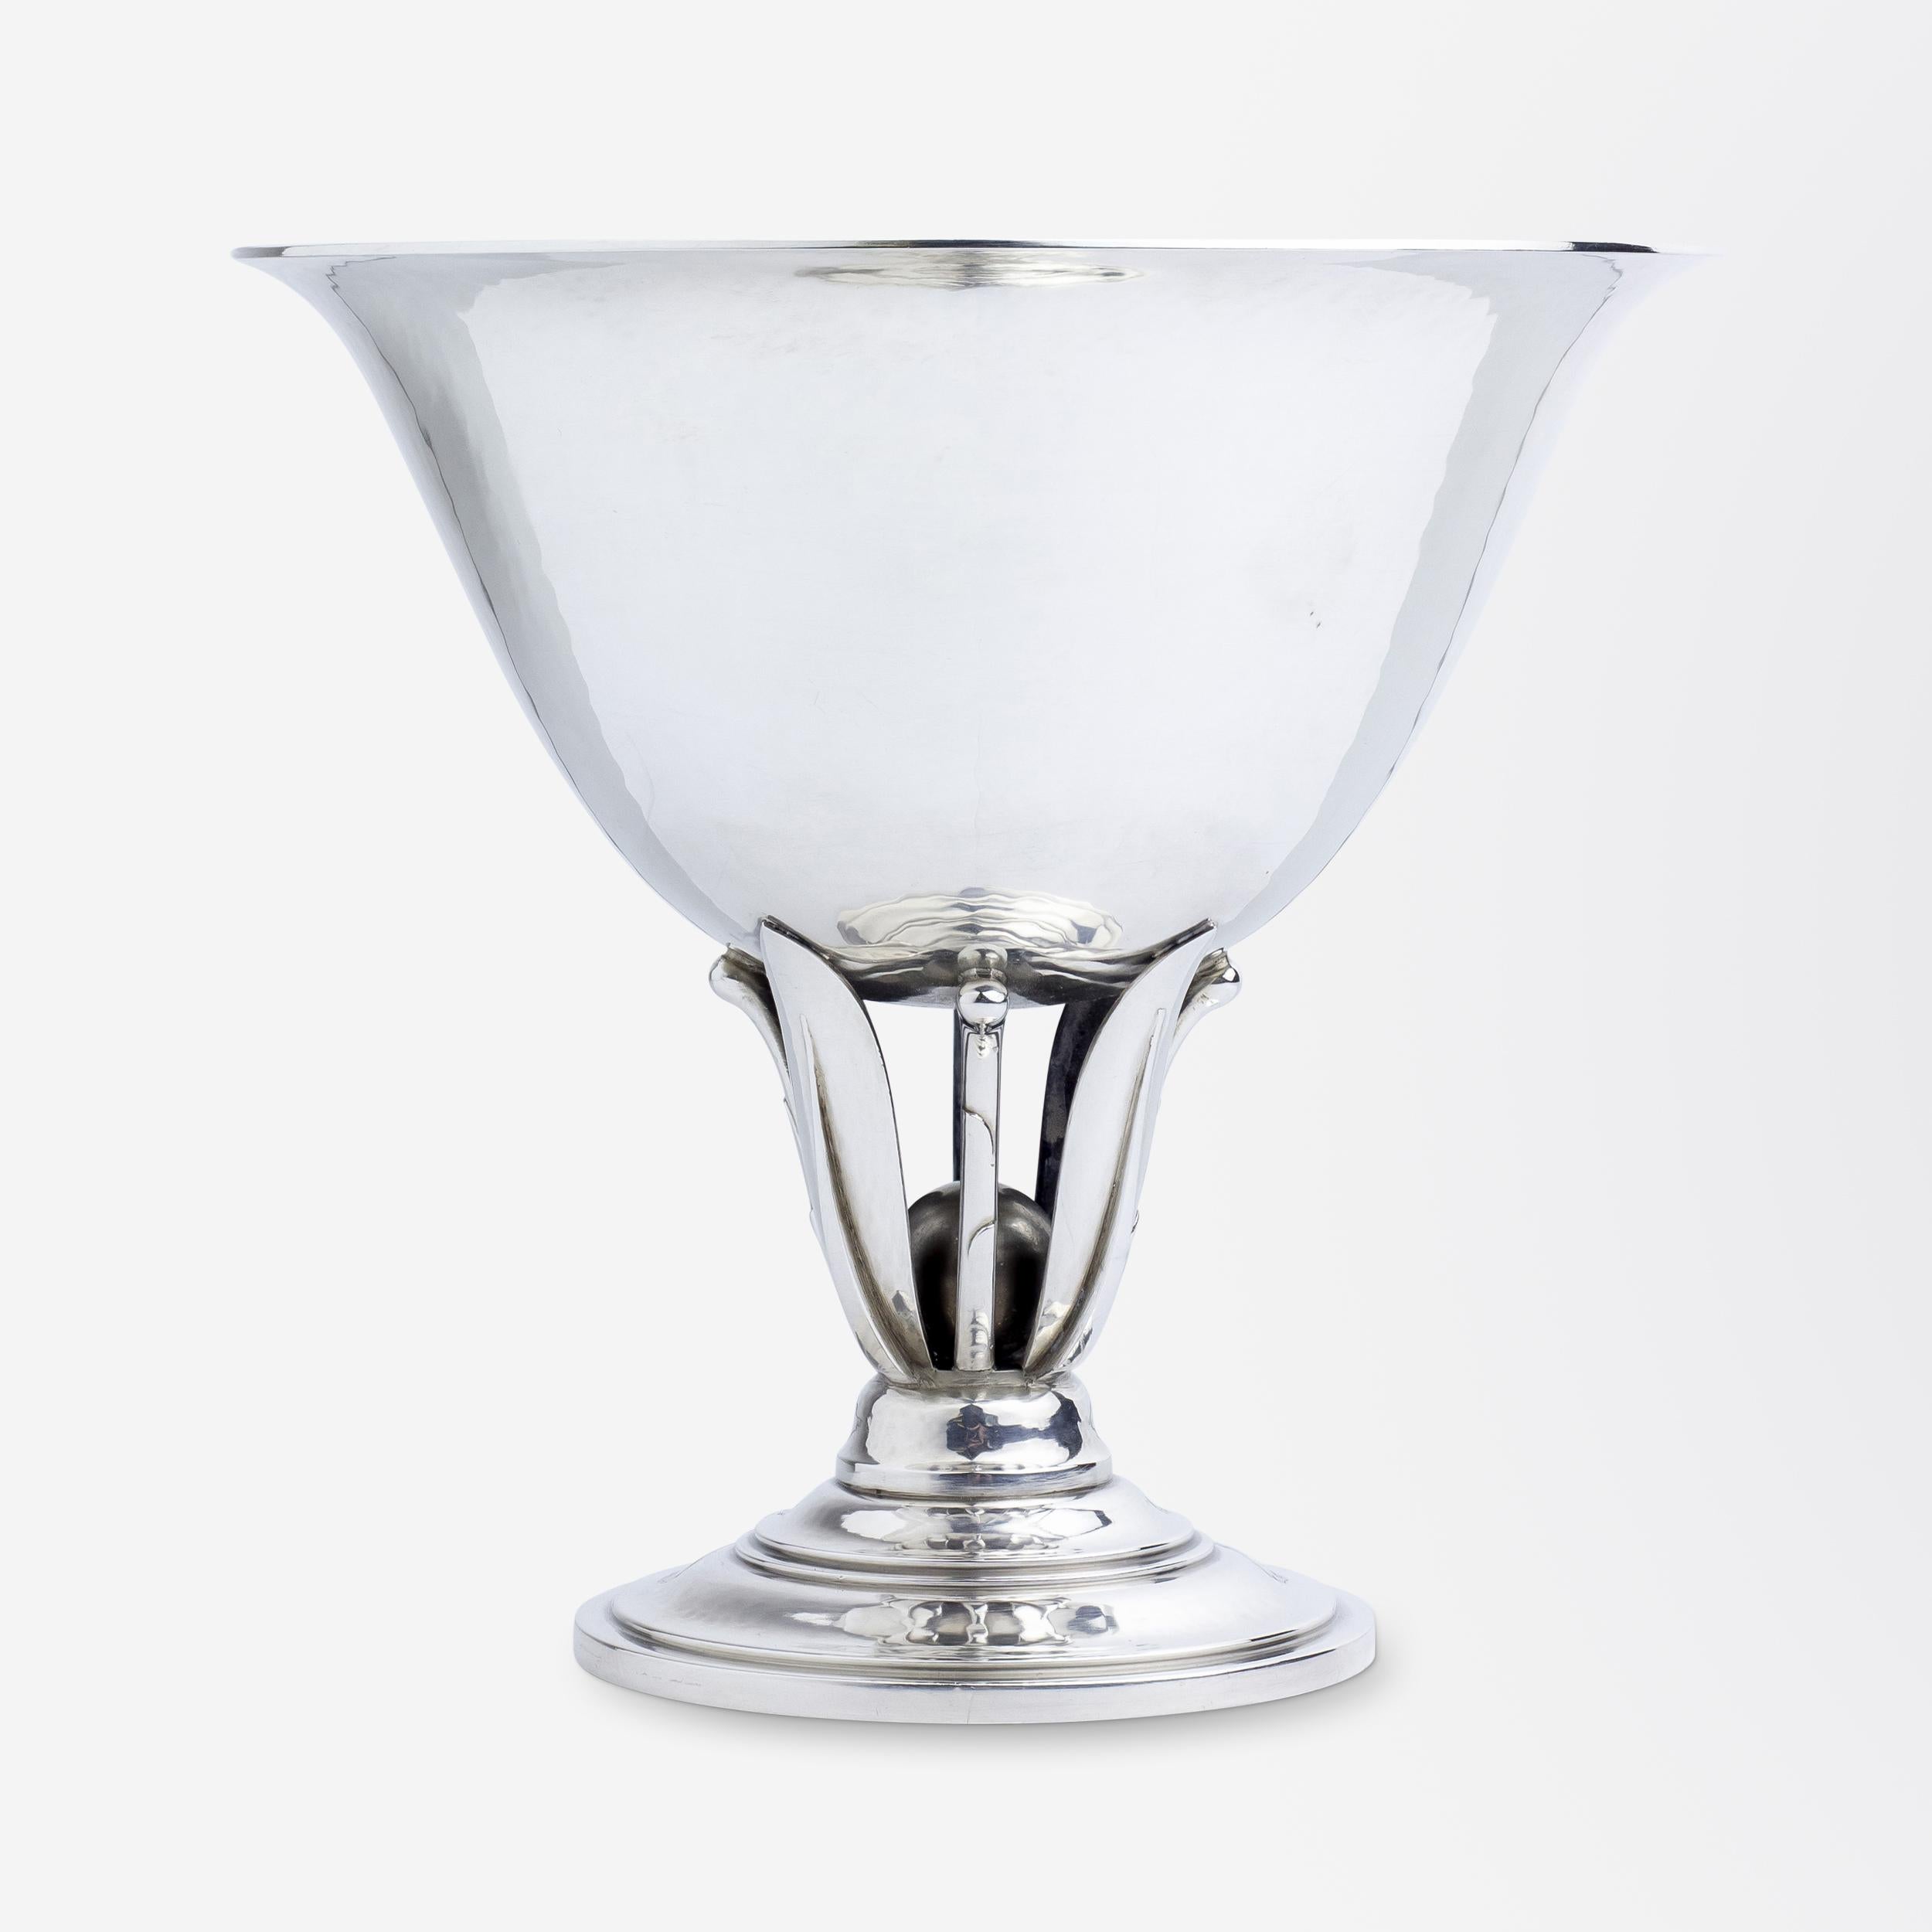 An elegant sterling silver comport designed by Johan Rohde (1856-1935) for Georg Jensen known as model #590. The hand hammered bowl is braced by delicate floral inspired elements, leading to a sphere contained in its centre. To the underside the